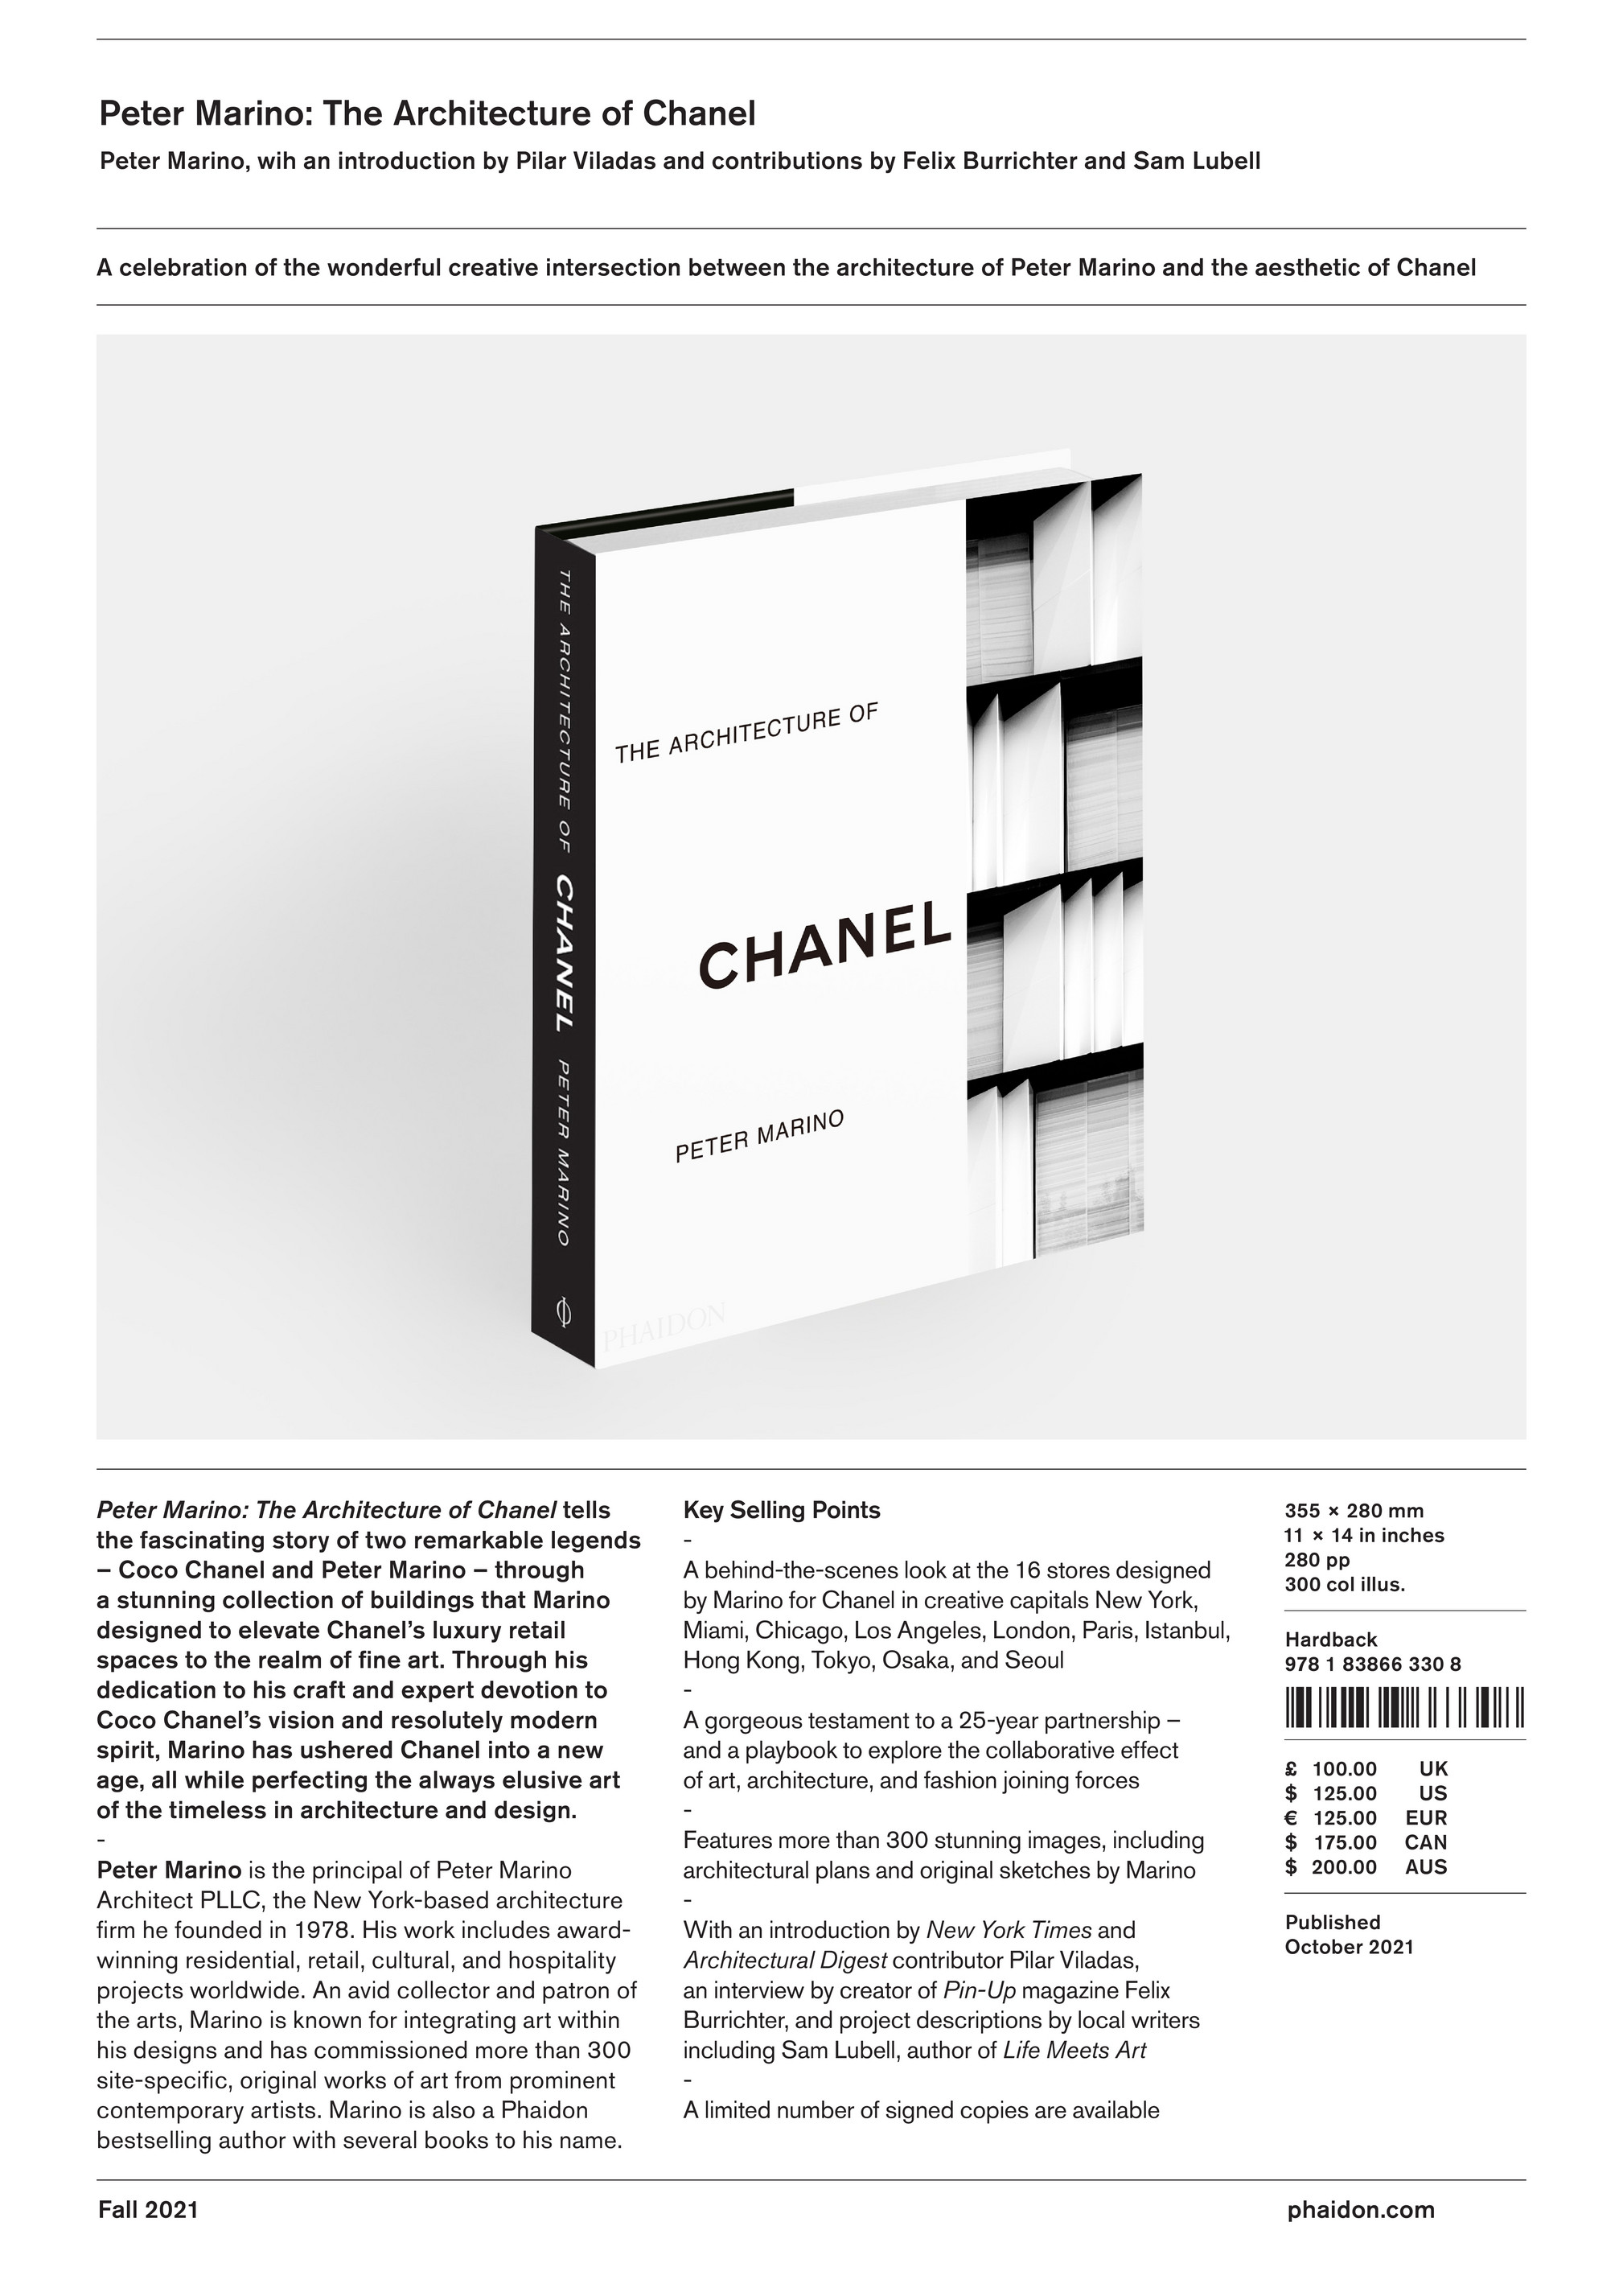 Chanel Architecture by Peter Marino Gets the Book Treatment – WWD